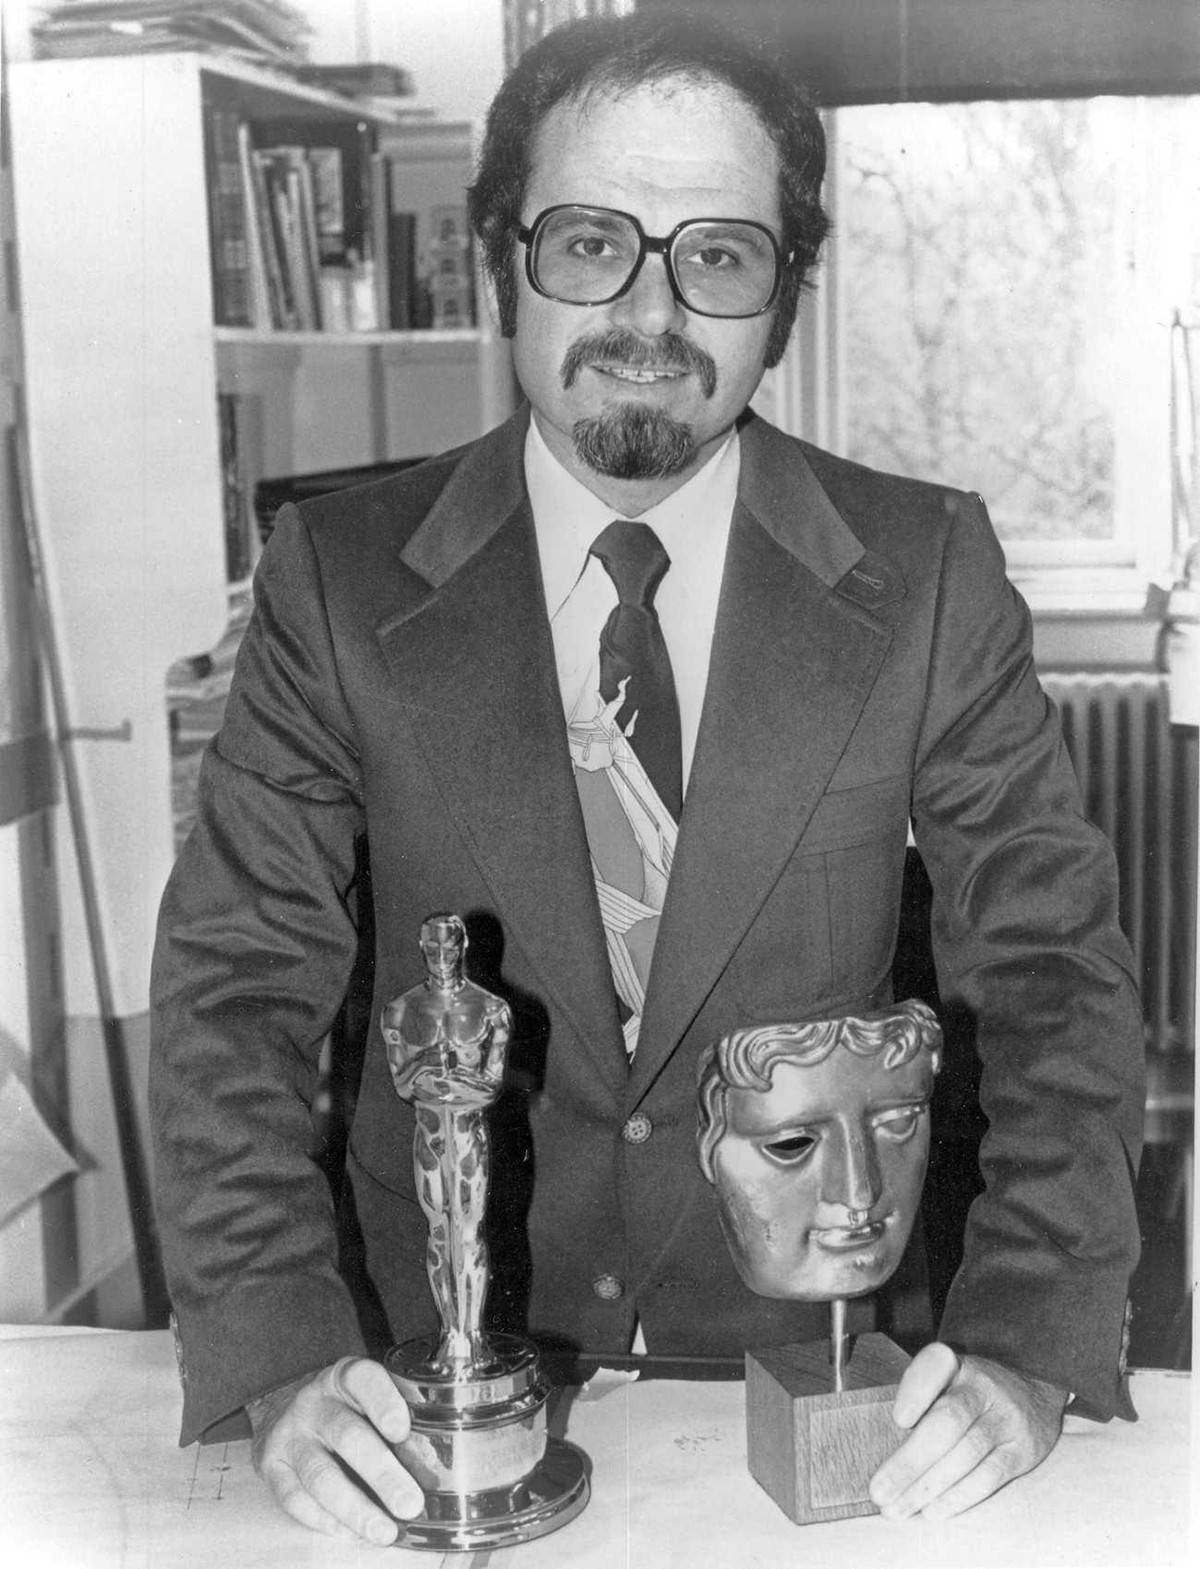 Zoran with his Oscar and BAFTA awards for 